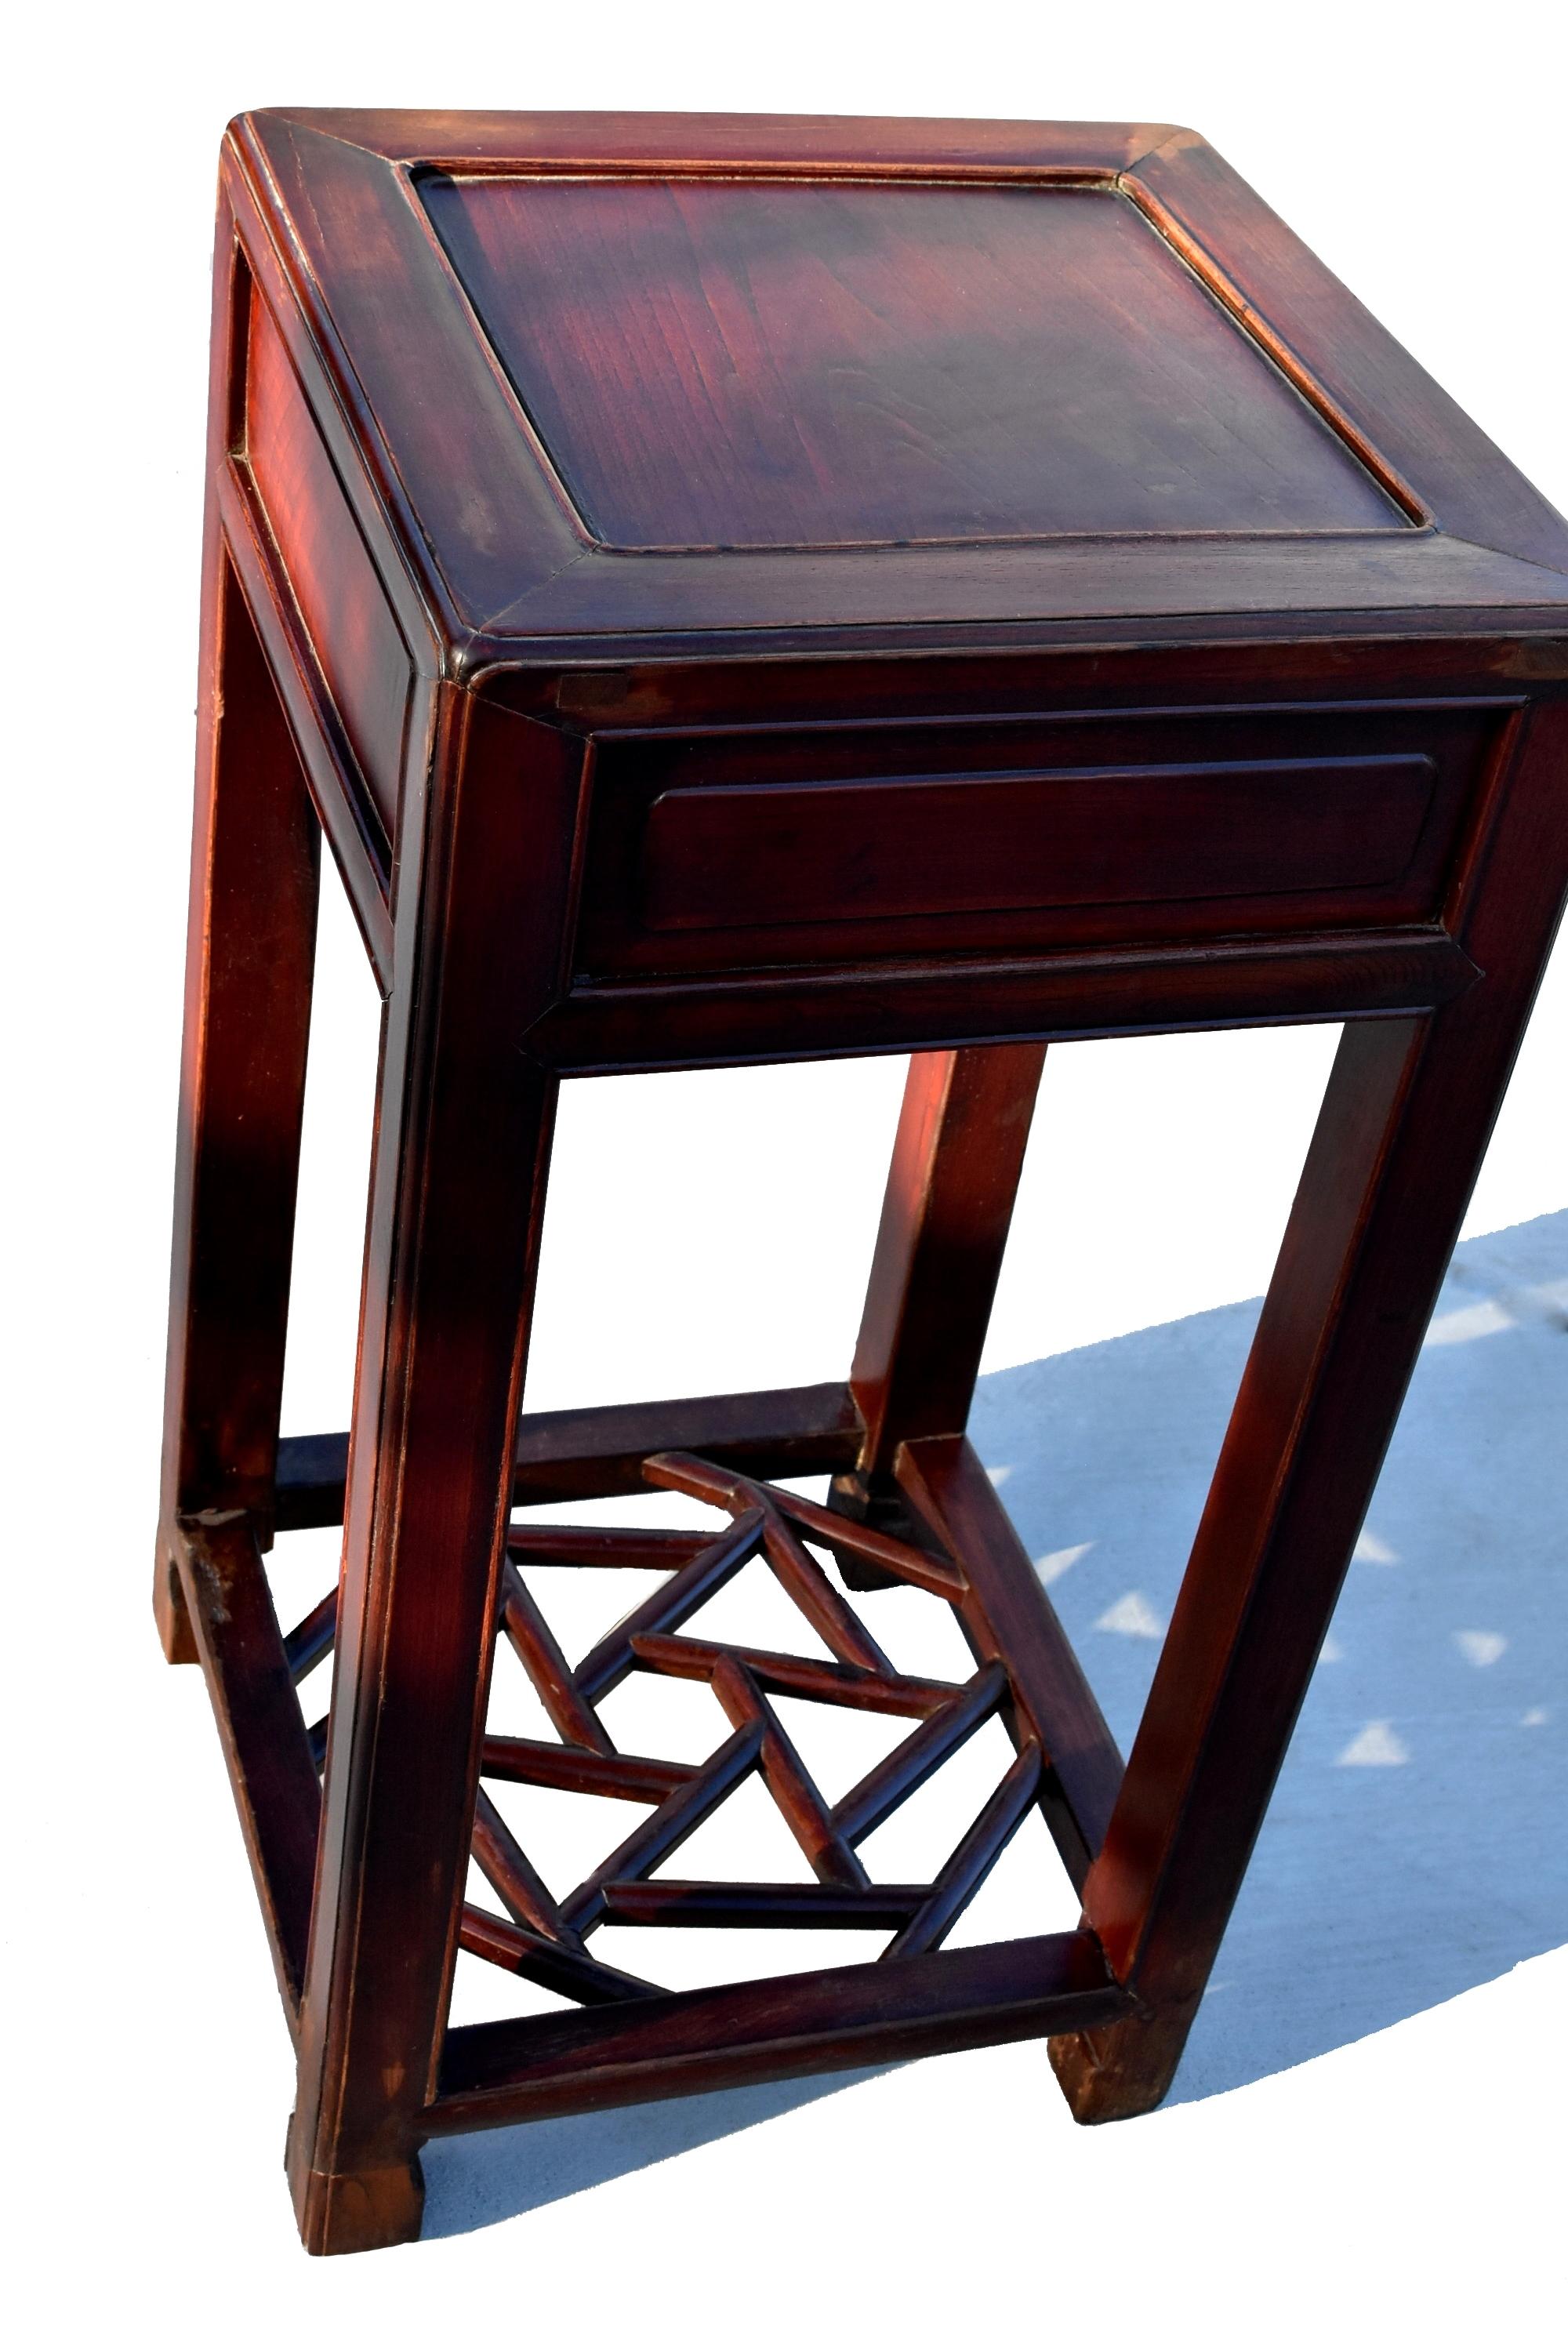 A beautiful 19th century solid wood side table. Mitered, Tenon and mortise, no-nail construction. Rimmed top, ice crackle screen base with hoof feet. A Classic Ming dynasty southern Chinese design.